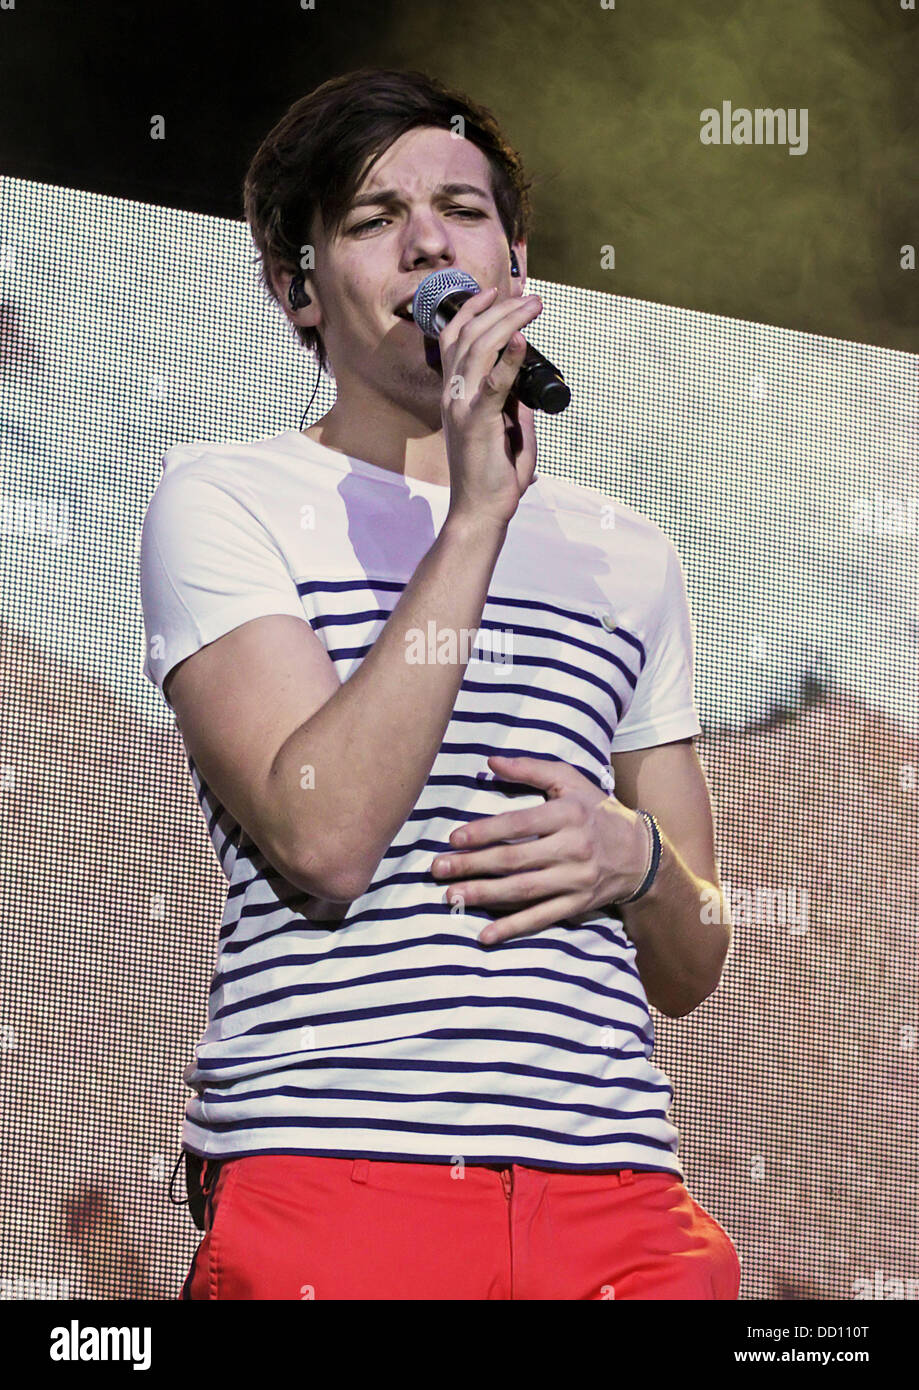 Mar. 06, 2012 - Durham, North Carolina; USA - Singer LOUIS TOMLINSON of the  band One Direction performs live as their 2012 tour makes a stop at the  Durham Performing Arts Center.